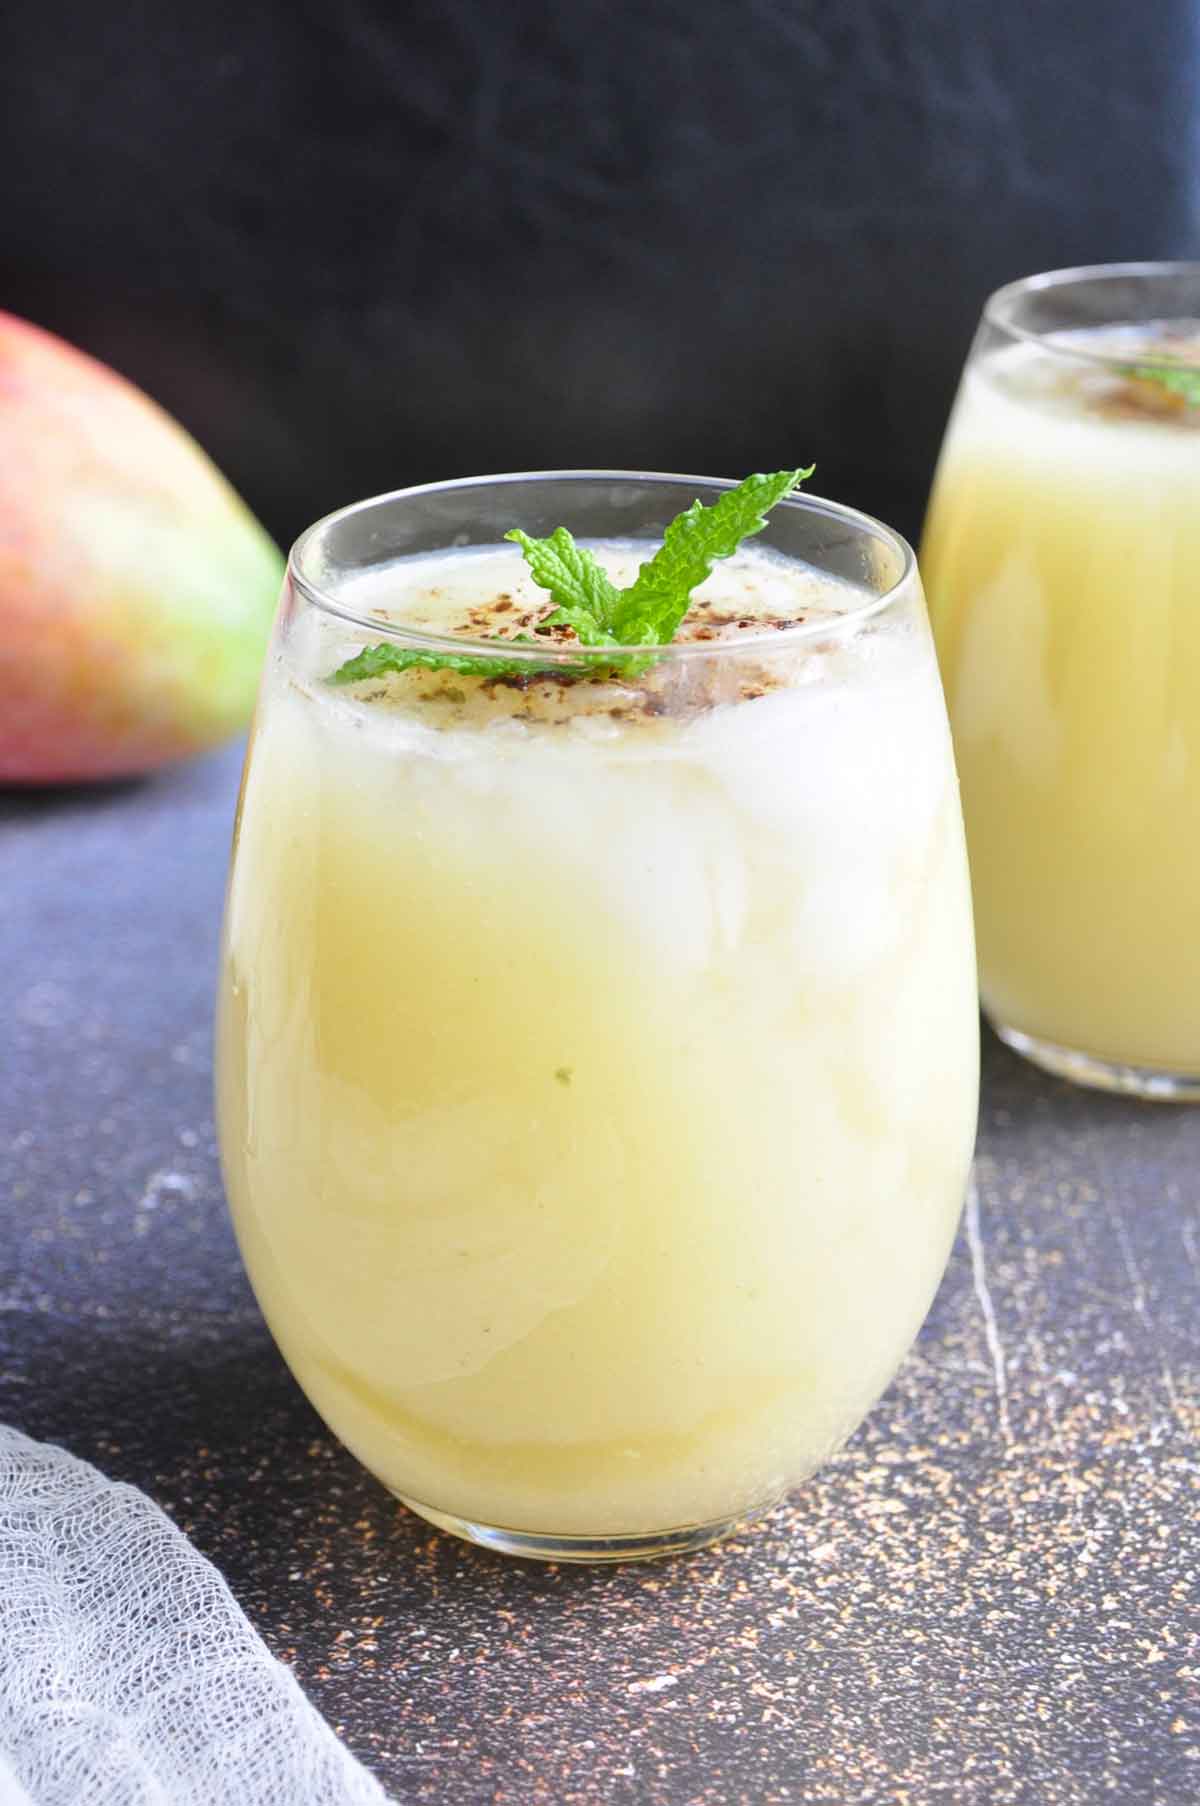 Raw mango sweet and sour drink in a glass garnished with mint leaves.